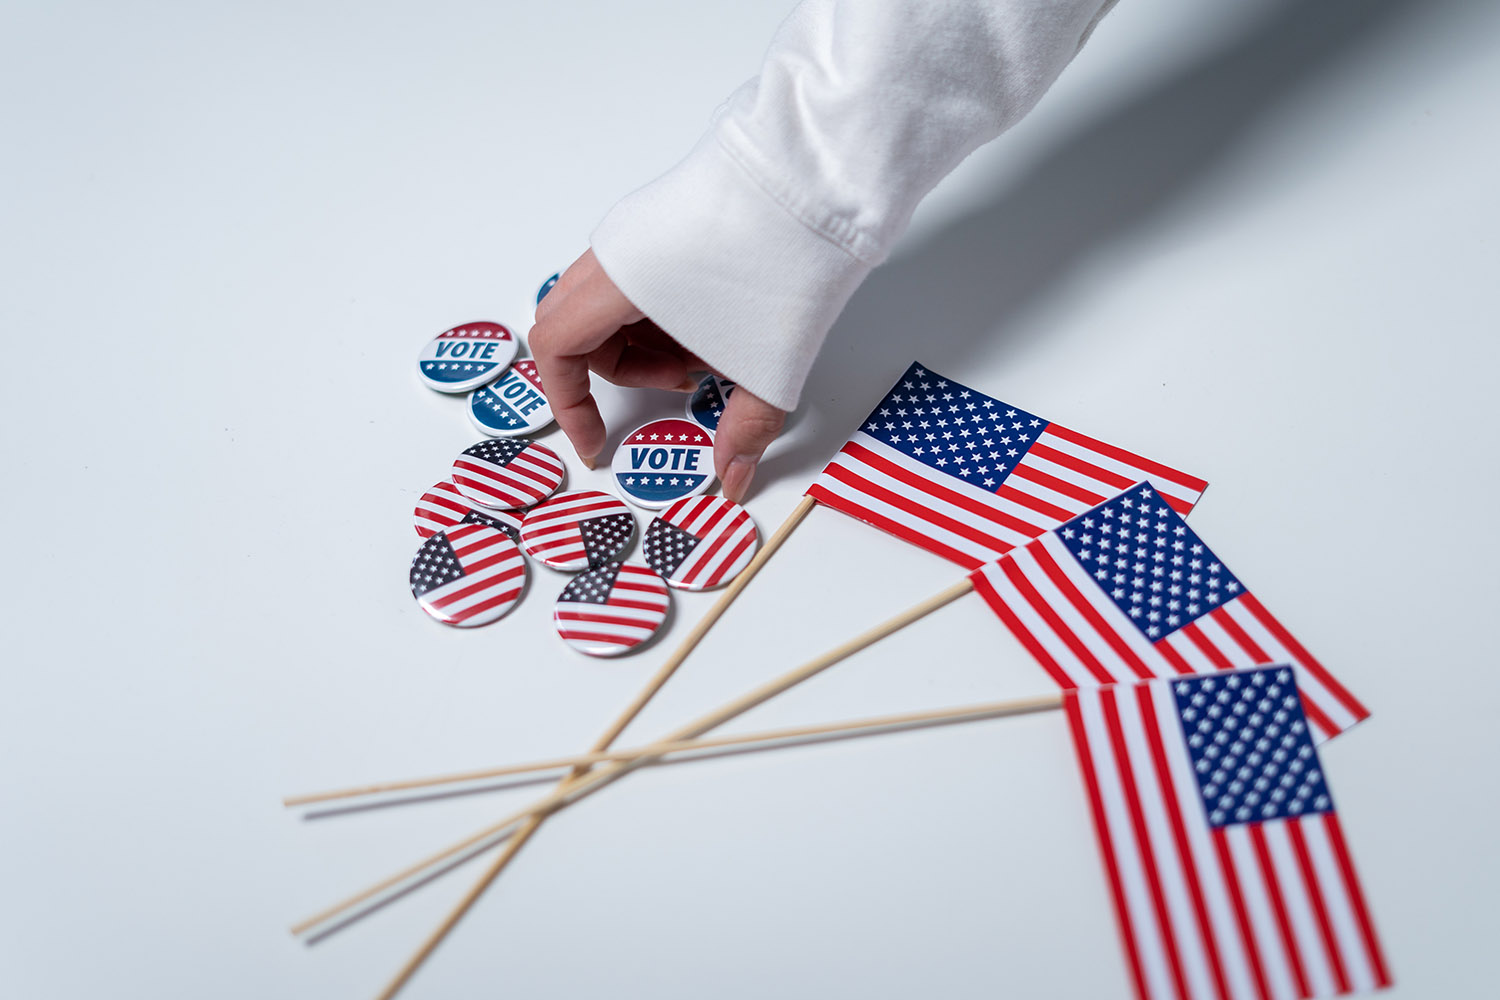 A hand reaches down for a "vote" button, which is sitting on a table with other buttons that say "vote" or have the American flag. Next to the buttons there are three small American flags on wood dowels.